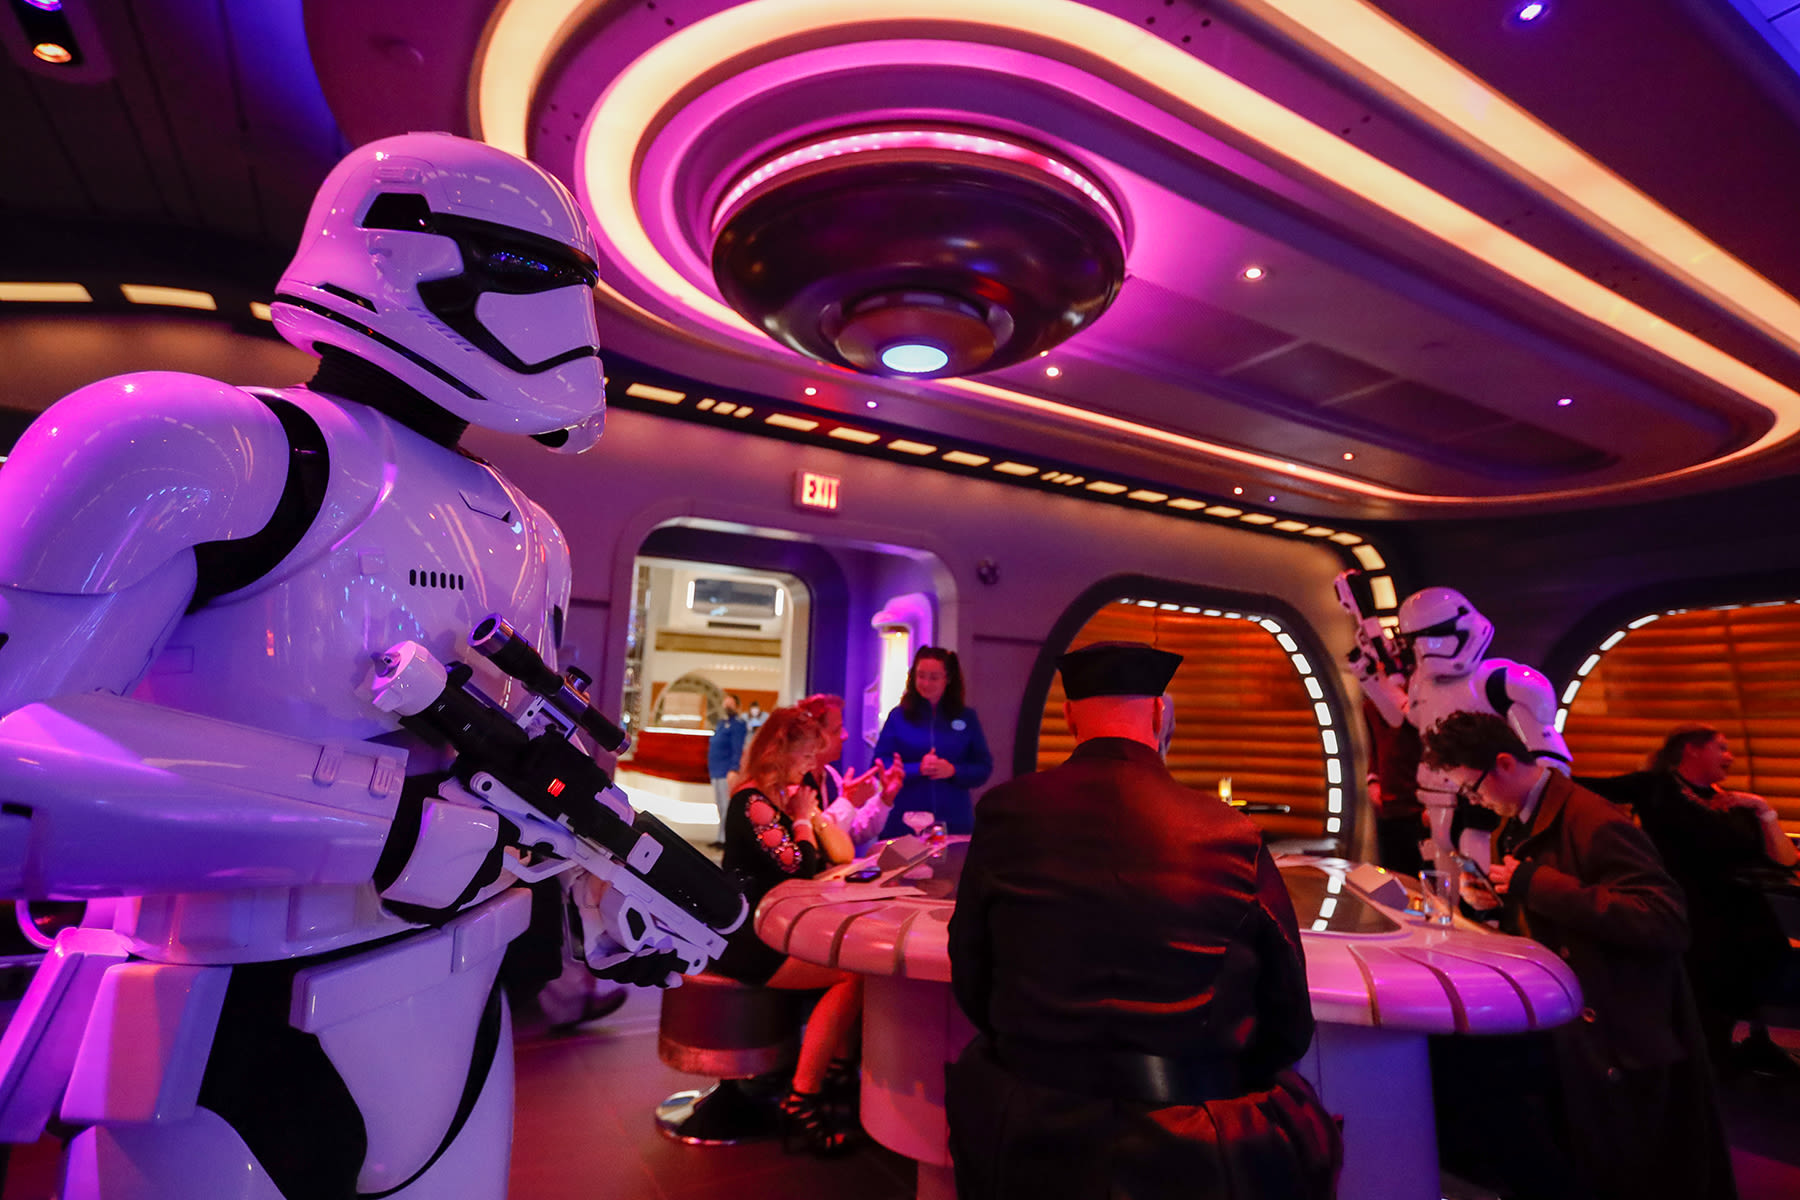 How a 4-Hour Video About Disney’s Failed ‘Star Wars Hotel’ Took Over the Internet